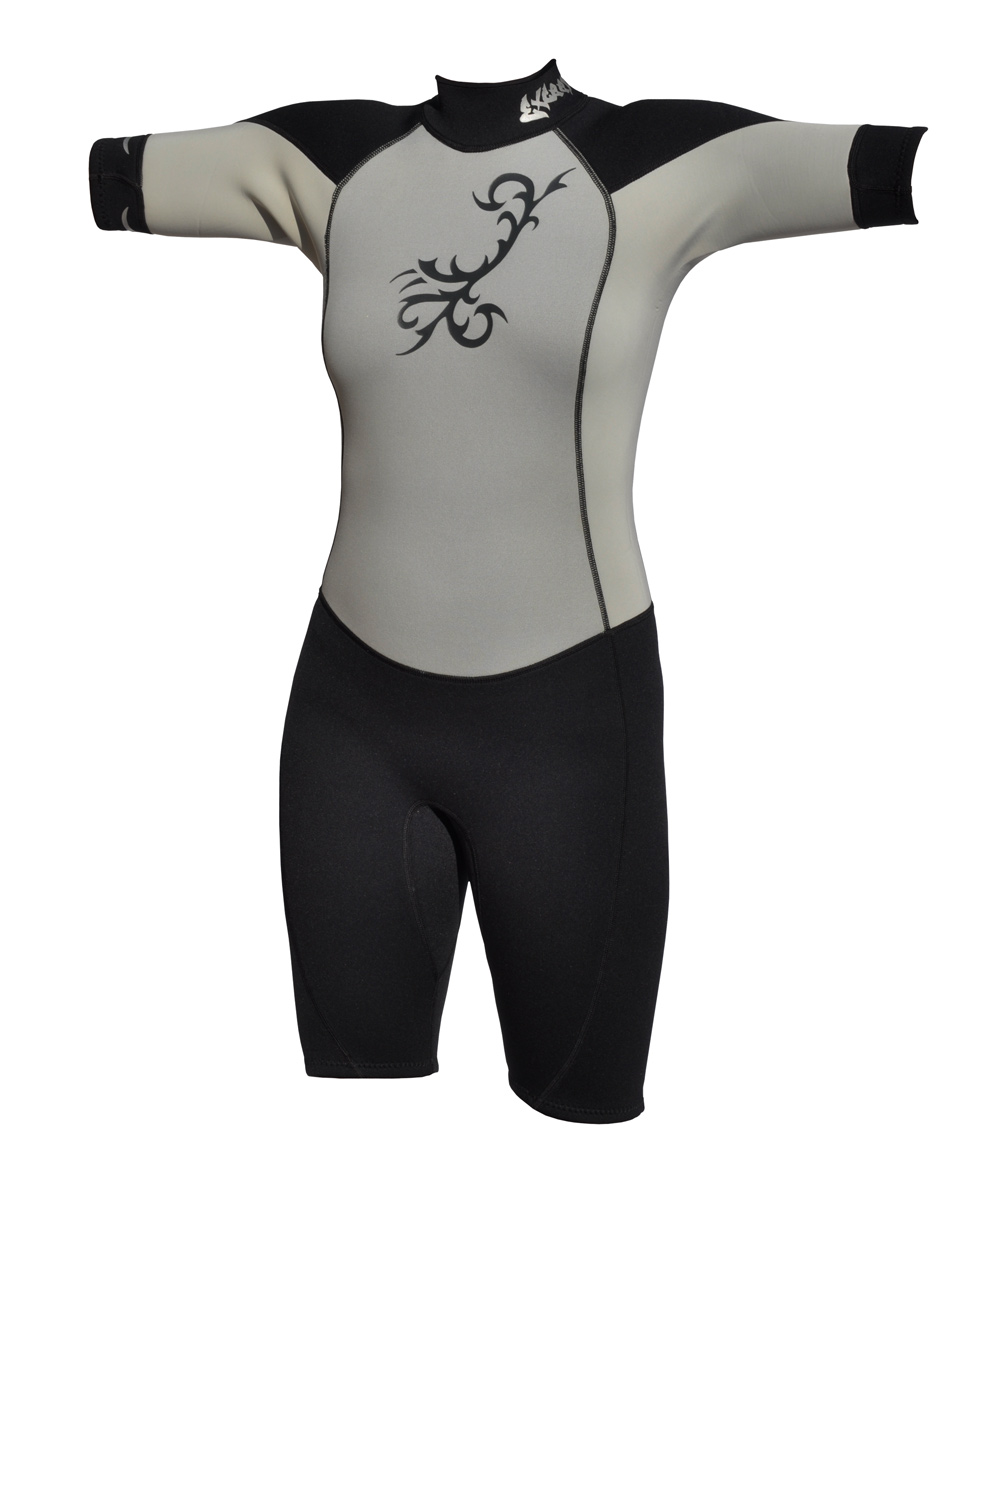 Exceed Emotion Womens 3/2mm Shorty Wetsuit